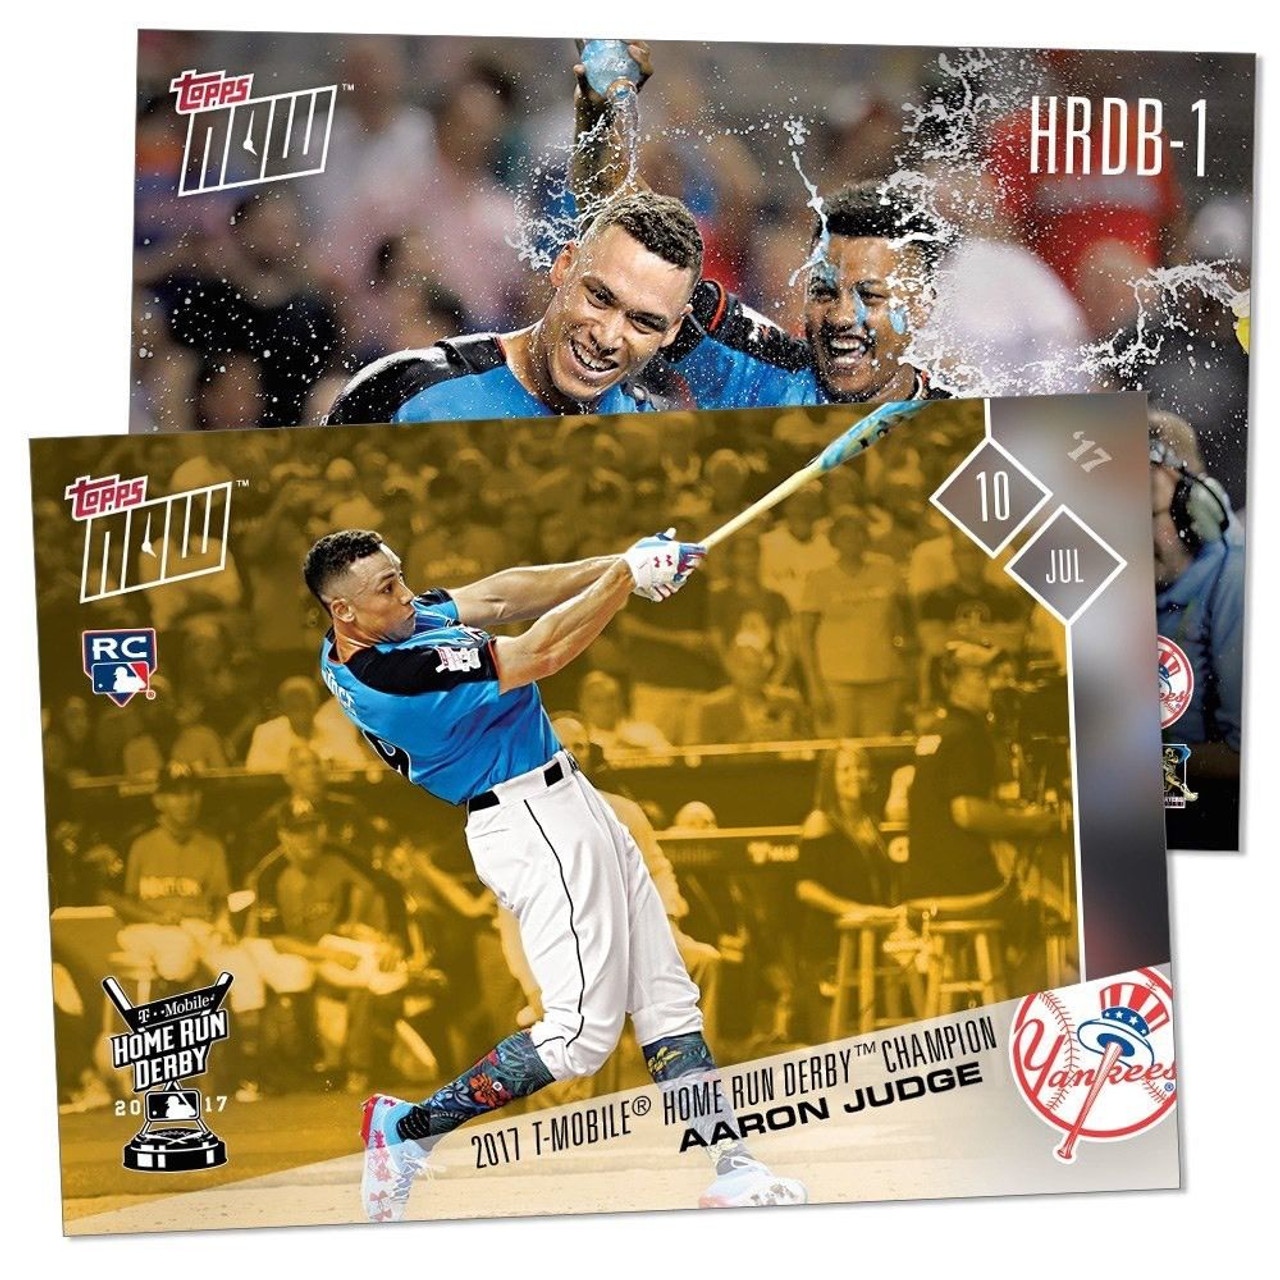 2018 Topps #1 Aaron Judge Baseball Card - Topps All-Star Rookie